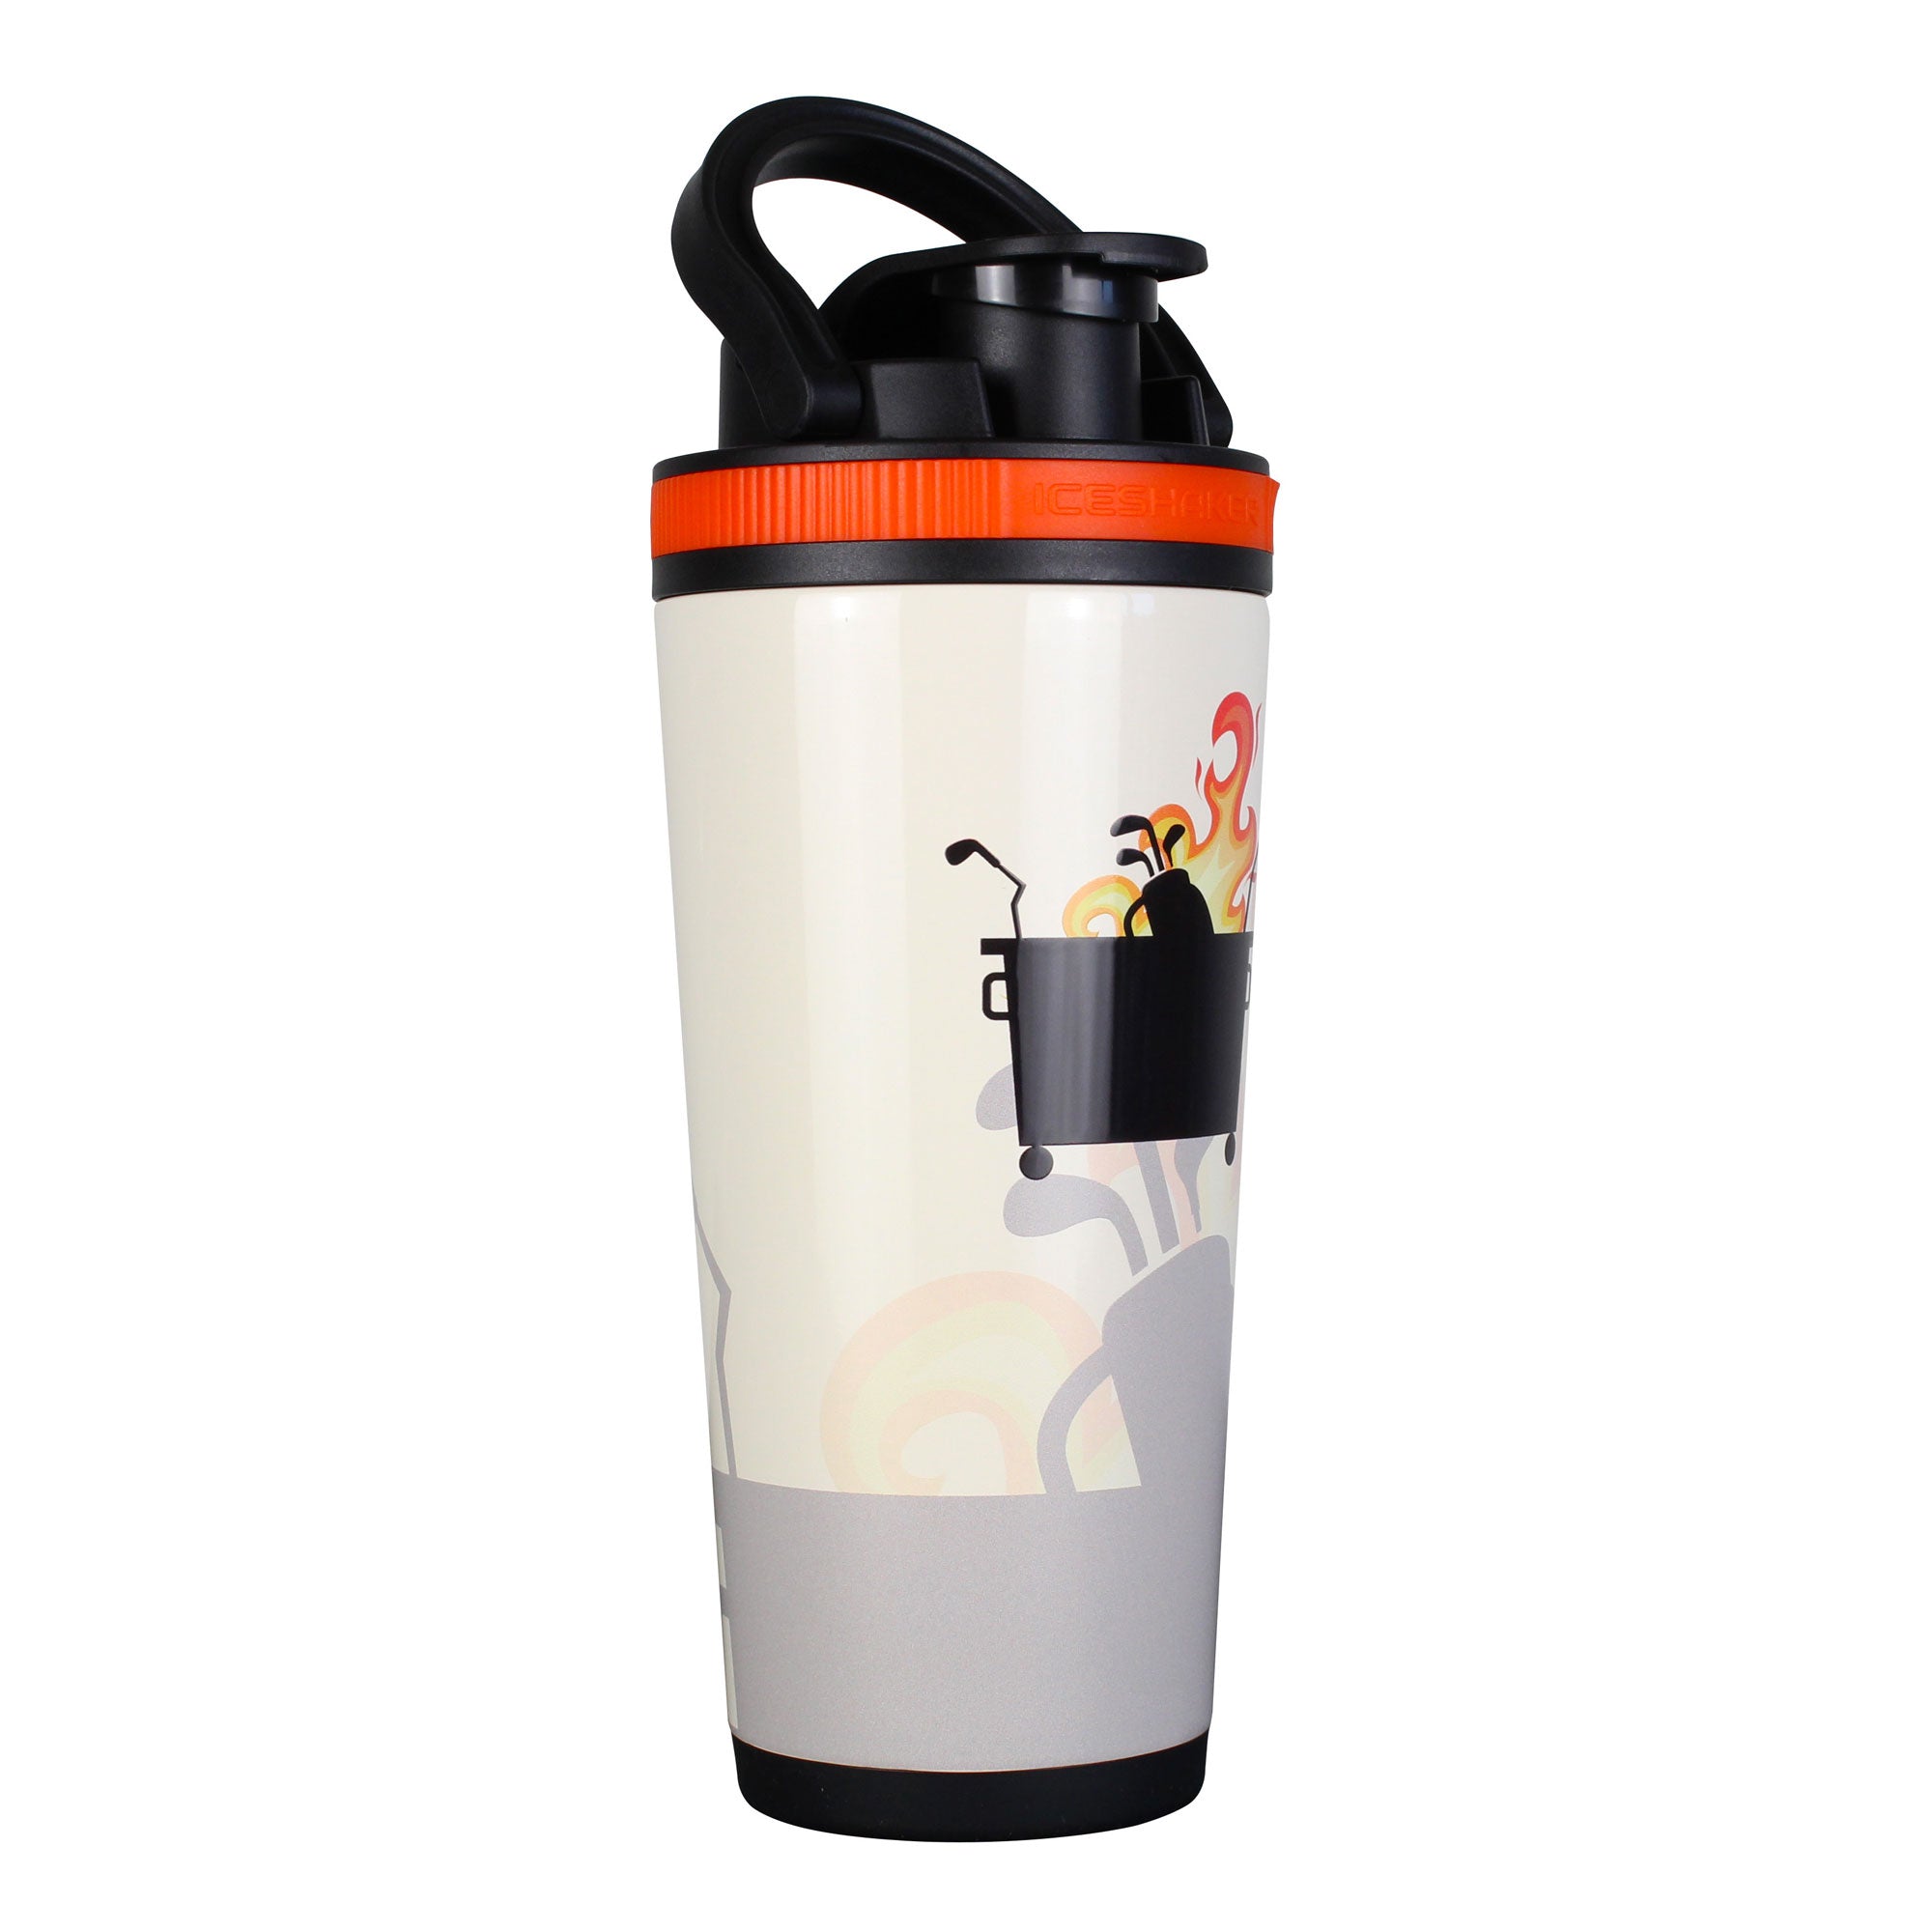 Ice shaker bottle • Compare & find best prices today »